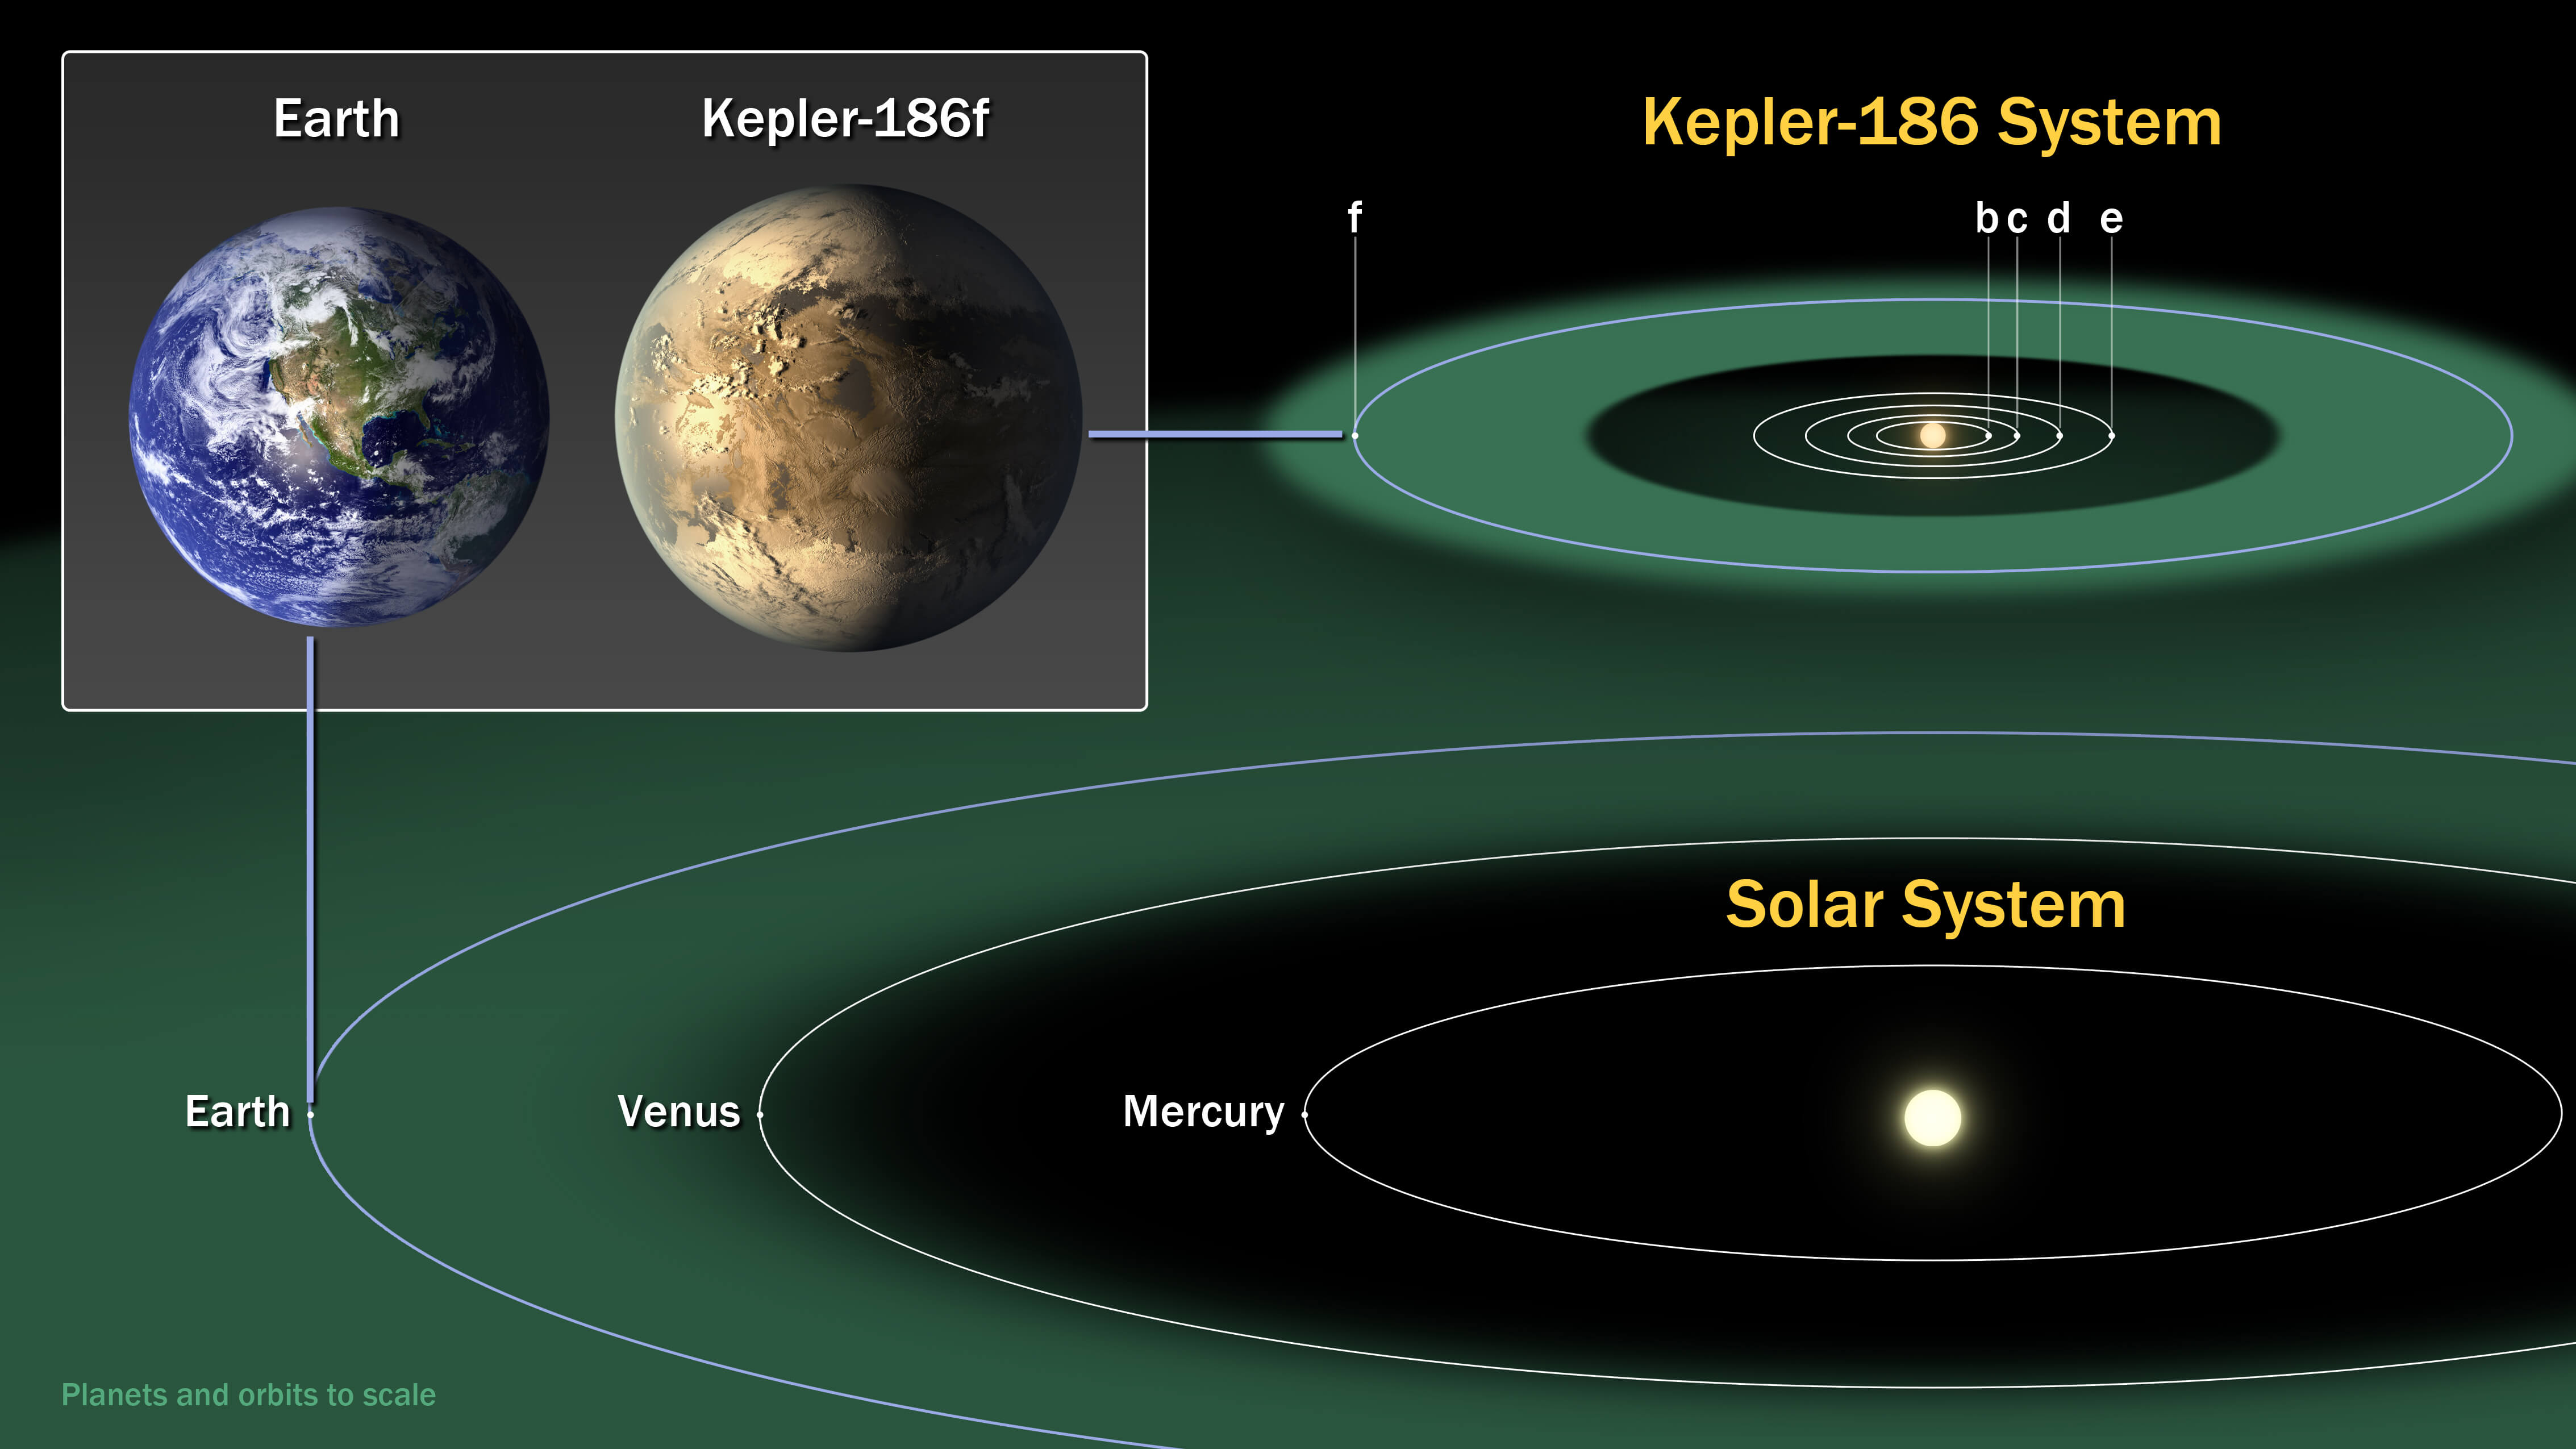 The chart compares the planets in our solar system with Kepler 186, a five-planet system 500 light-years from Earth in the direction of the Cygnus group. The five planets orbit Kepler 186 - an M-type dwarf, a star about half the size and mass of the Sun. Figure: NASA Ames Center, ST Institute, JPL-Caltech